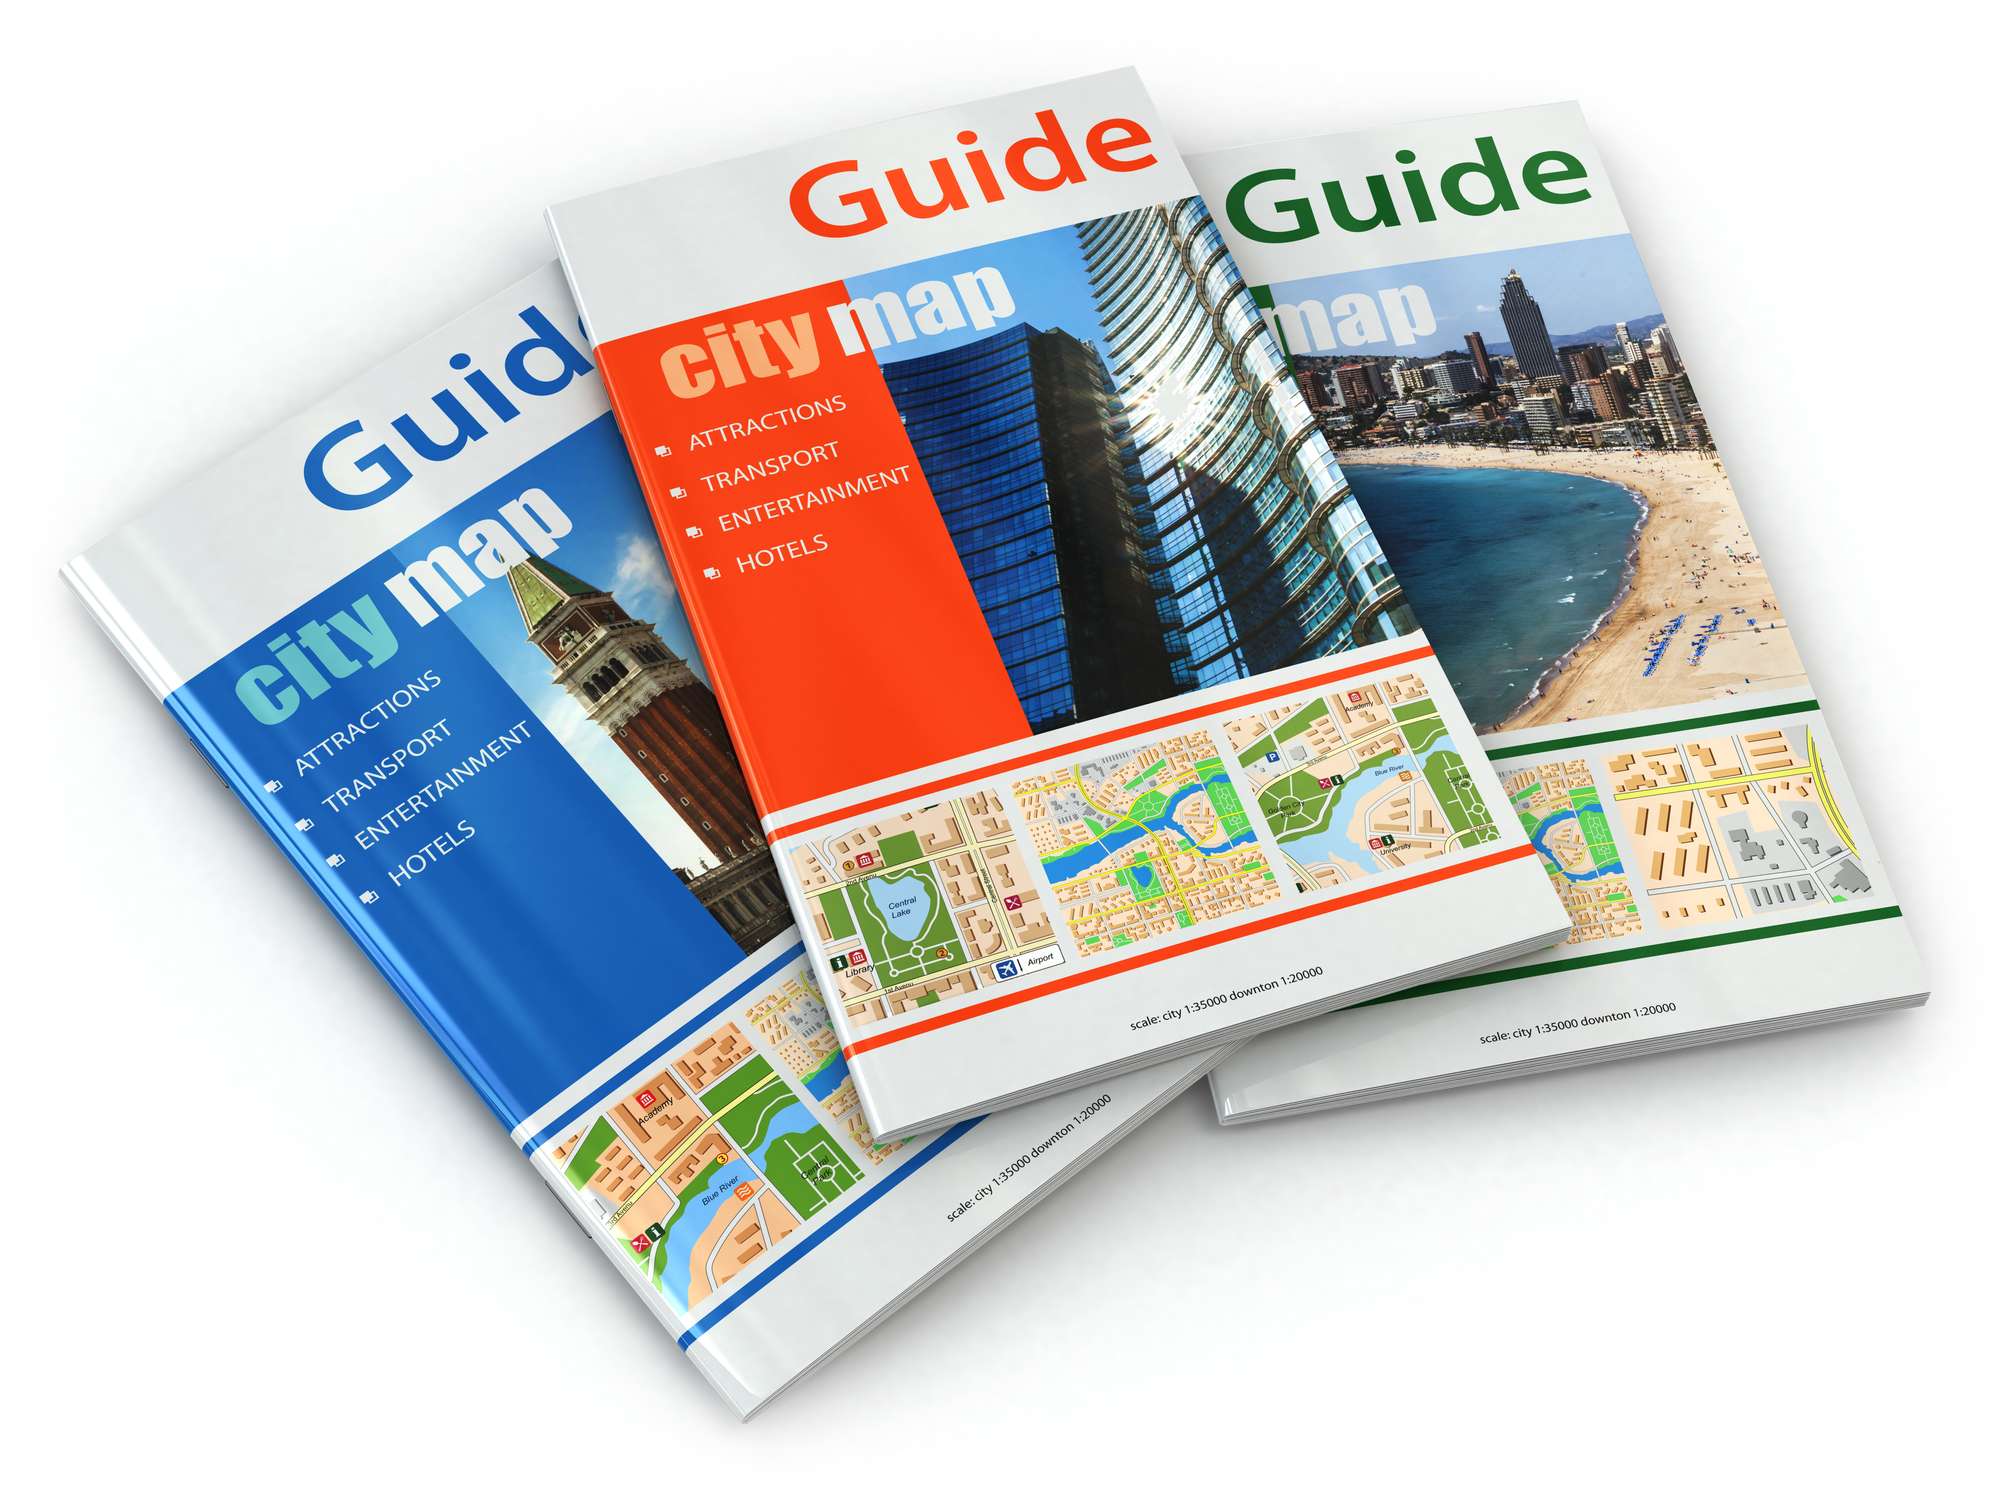 Corporate Travel Book - Why Do You Need One?